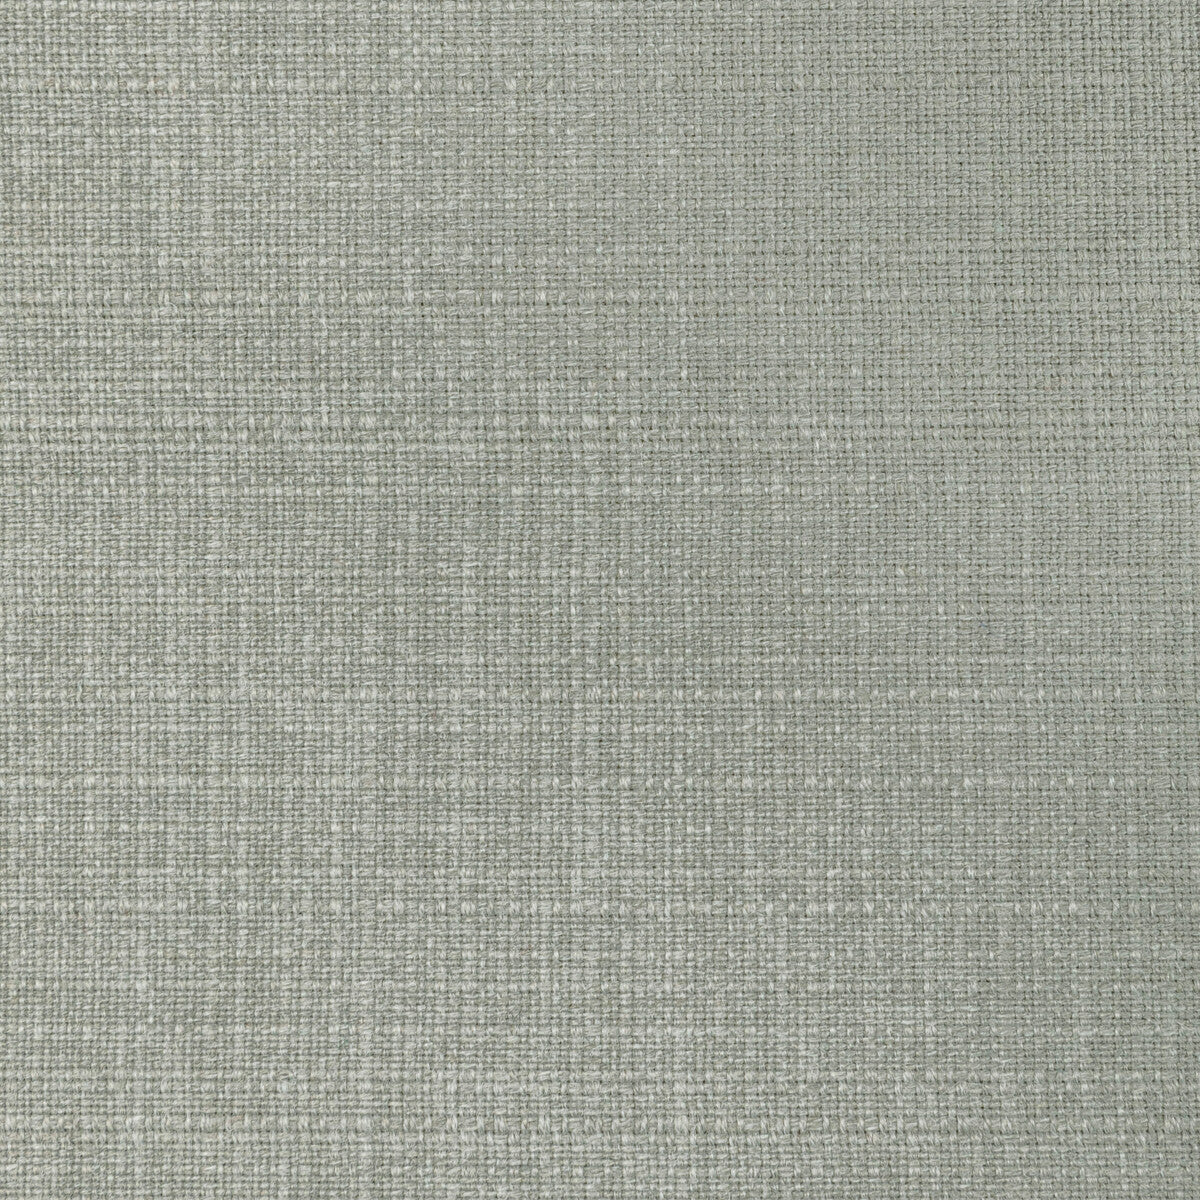 Kravet Basics fabric in 36821-11 color - pattern 36821.11.0 - by Kravet Basics in the Indoor / Outdoor collection